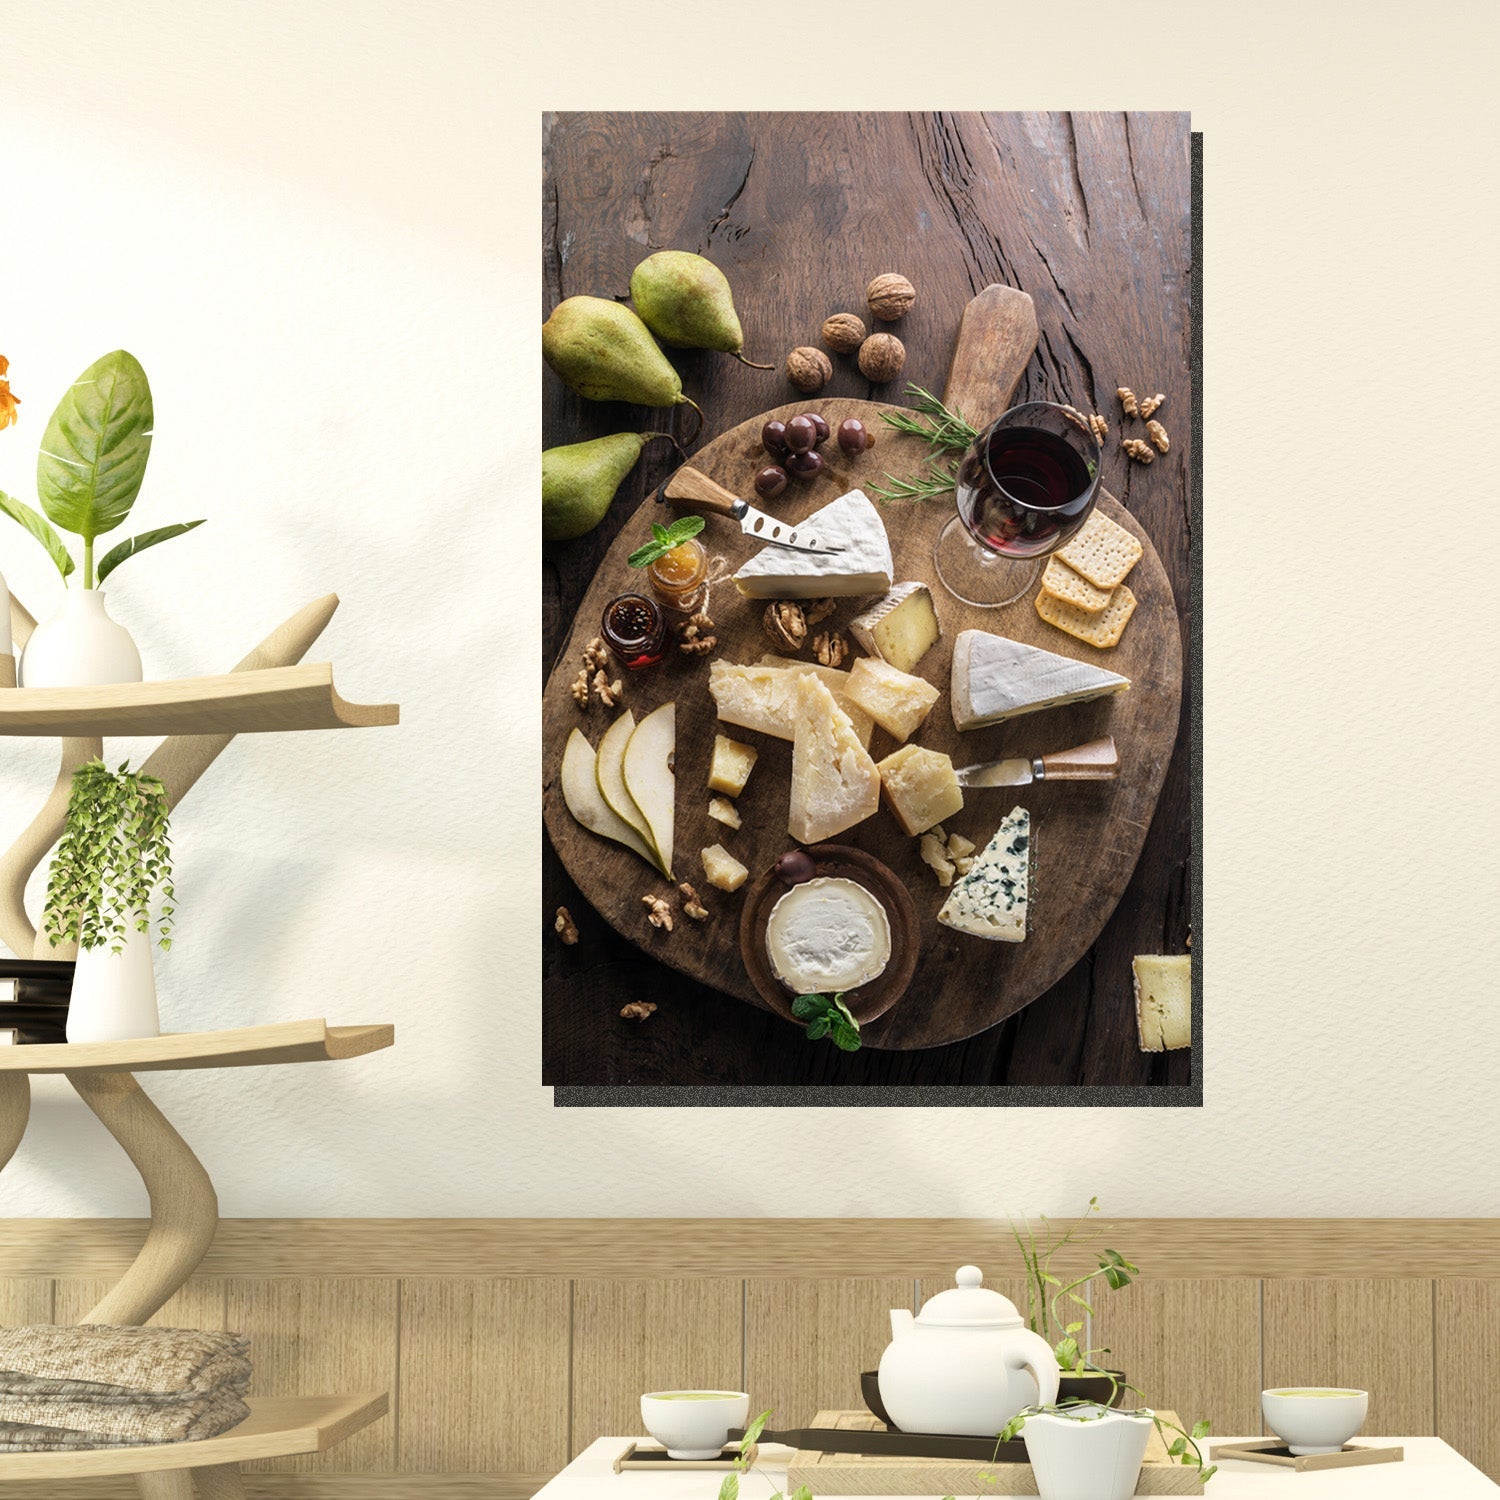 https://cdn.shopify.com/s/files/1/0387/9986/8044/products/FineWineandCheesePlatterCanvasArtprintStretched-4.jpg